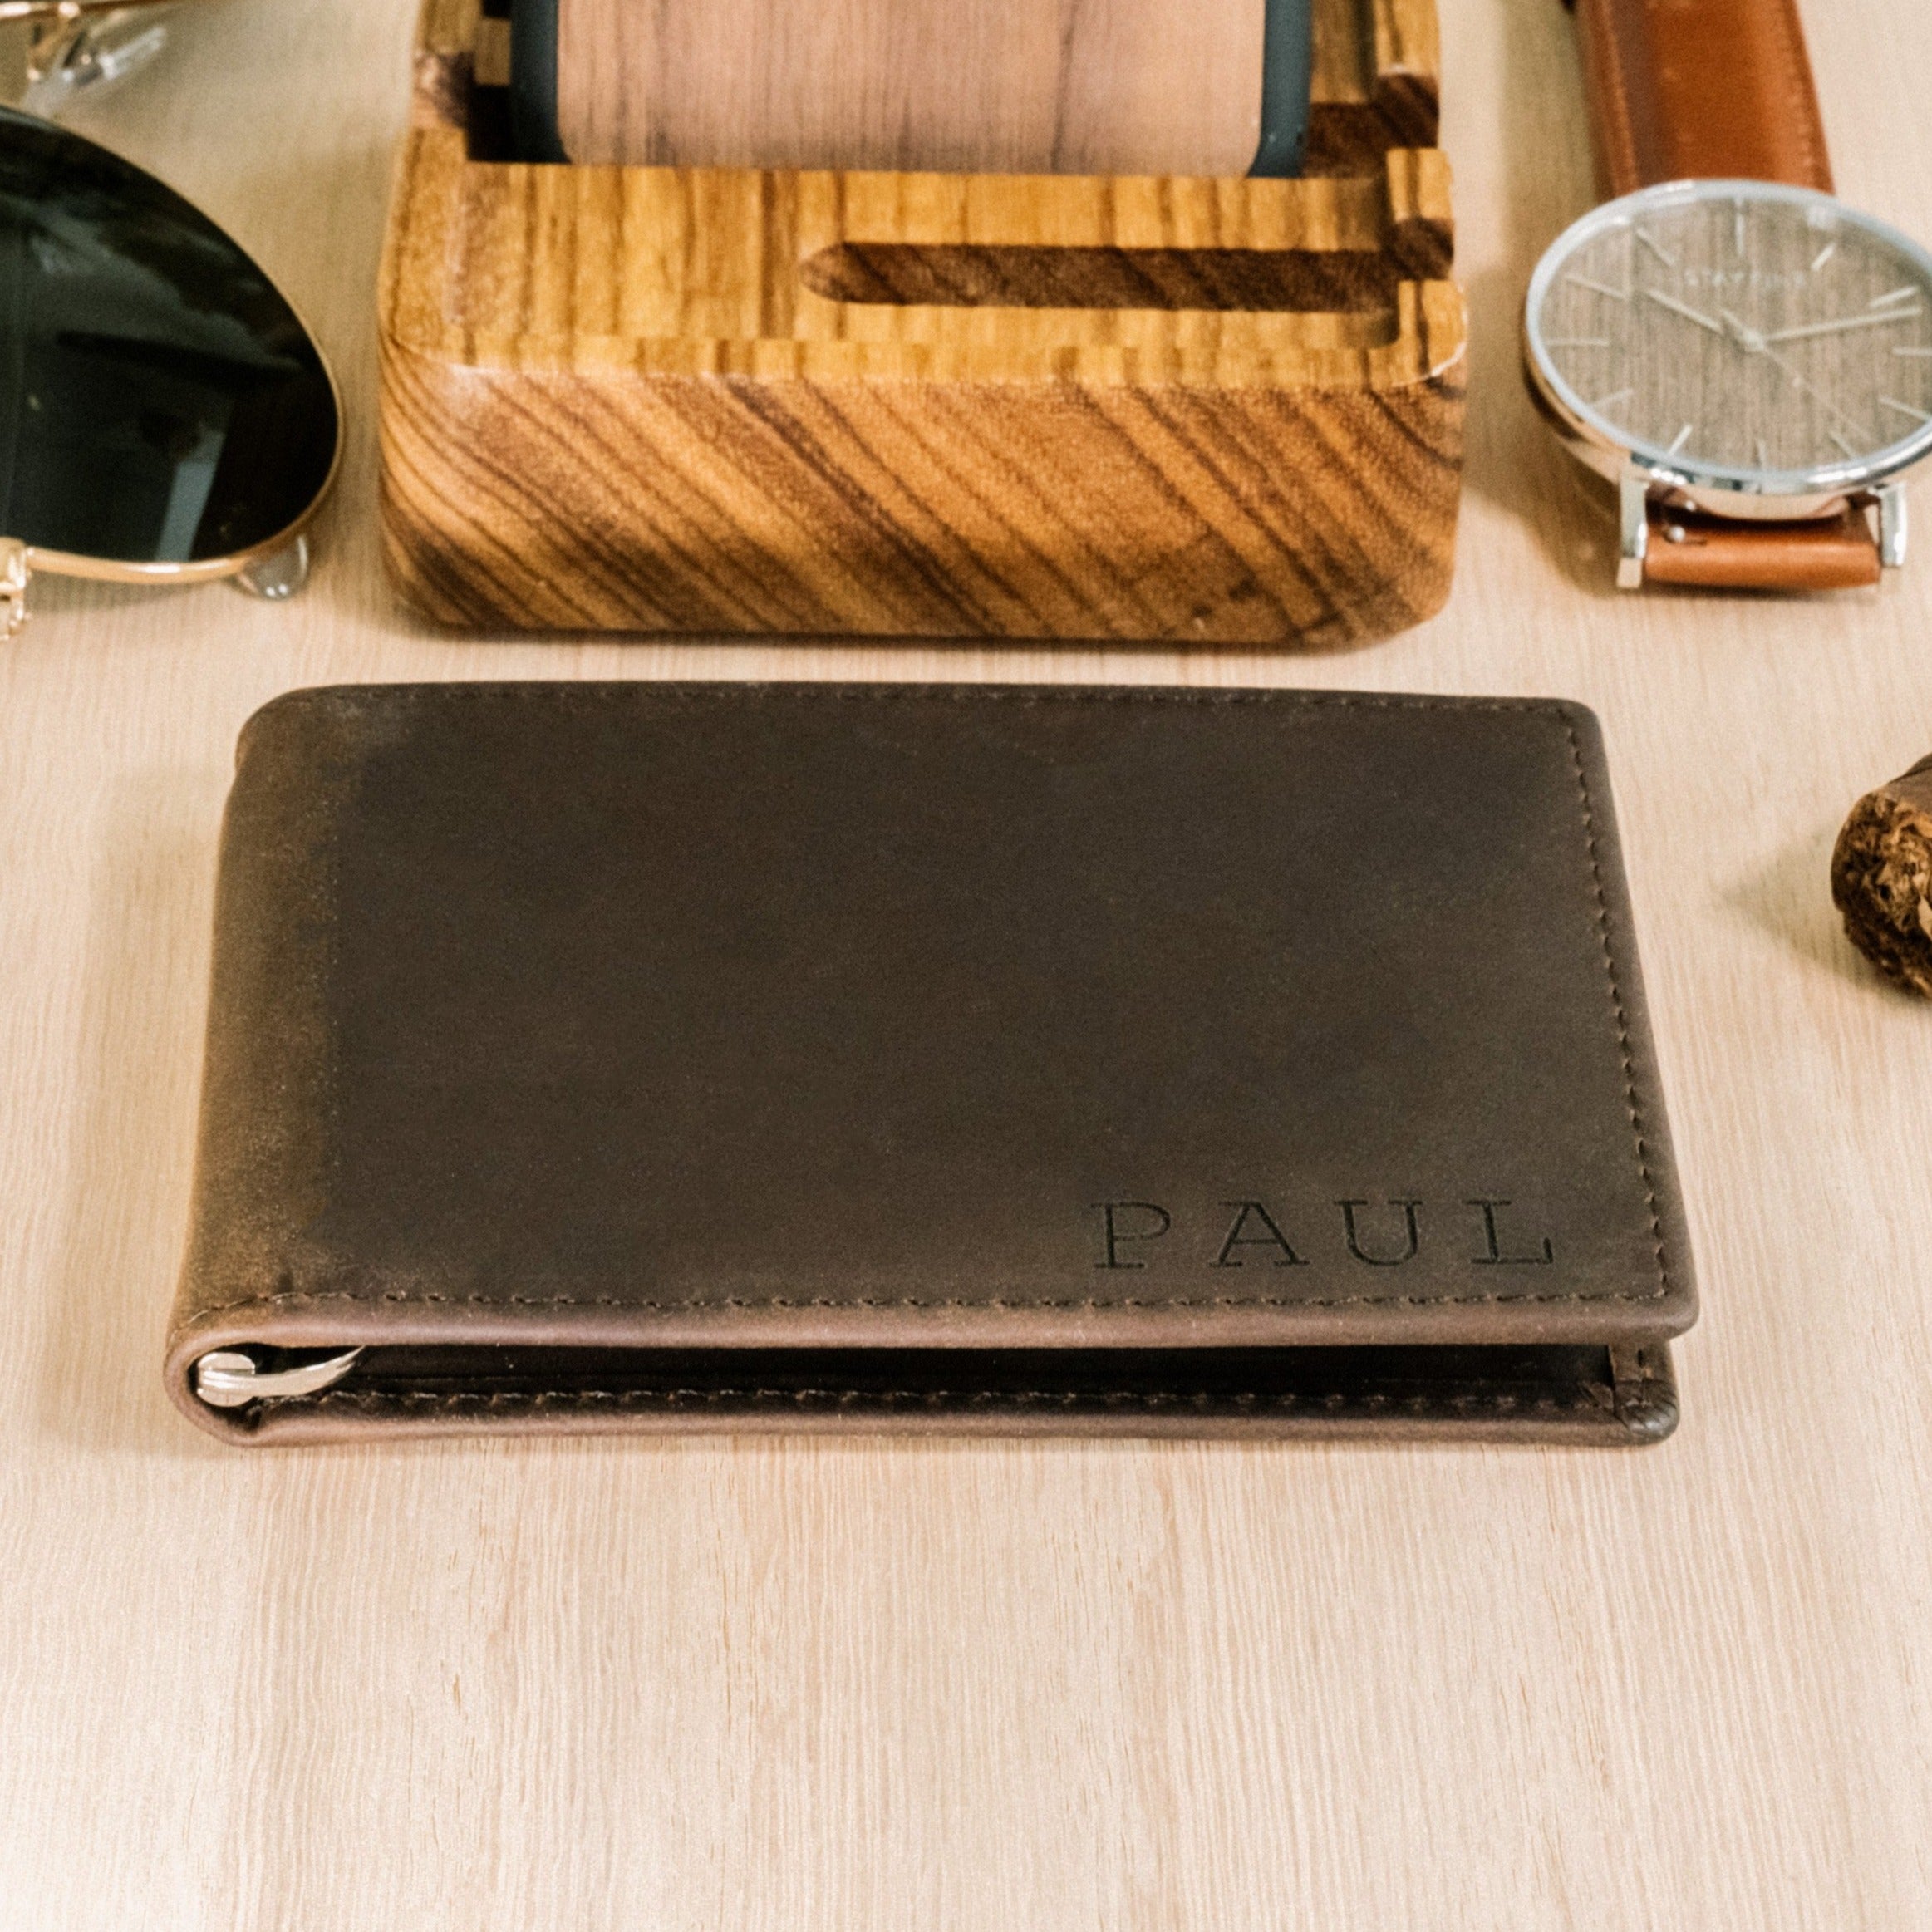 Men's Personalized Leather Wallets: Check Out Our Collection – stayfineco